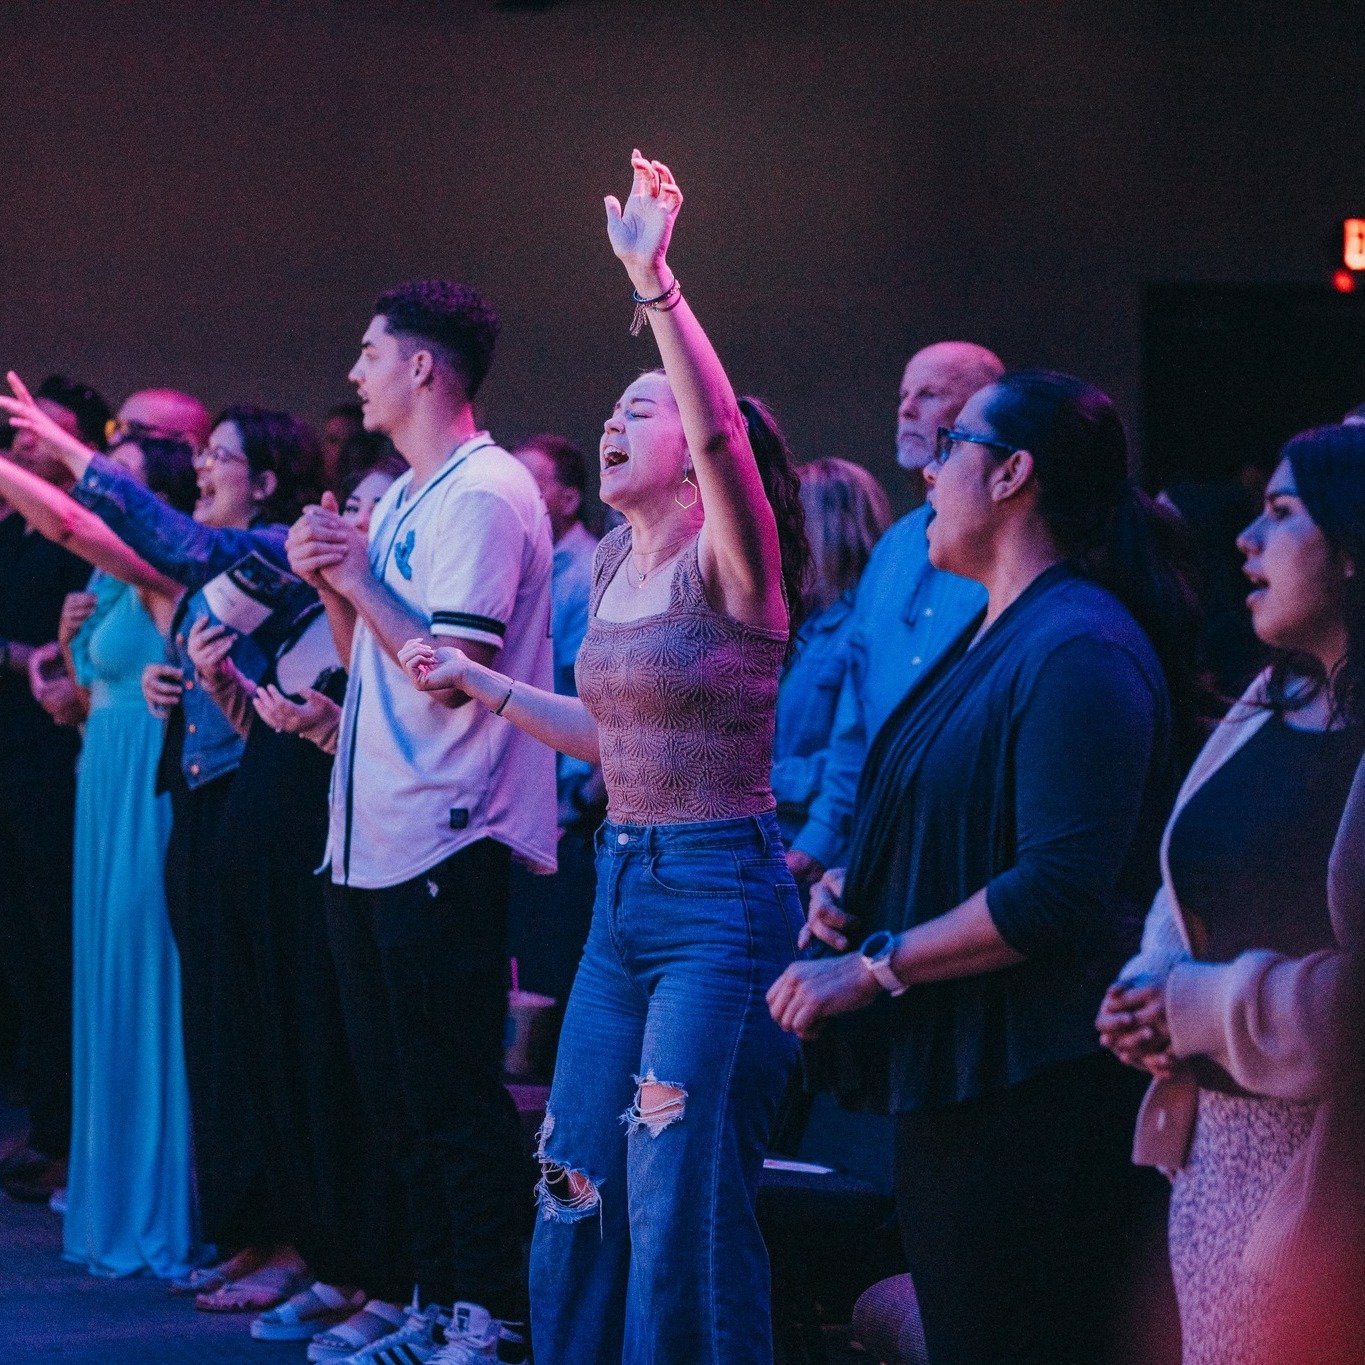 Big day tomorrow! We are finishing up our series on Psalms, celebrating Mother's Day, and best of all, gathering to worship Jesus! It's going to be a great day to invite someone new. See you in the A-M!